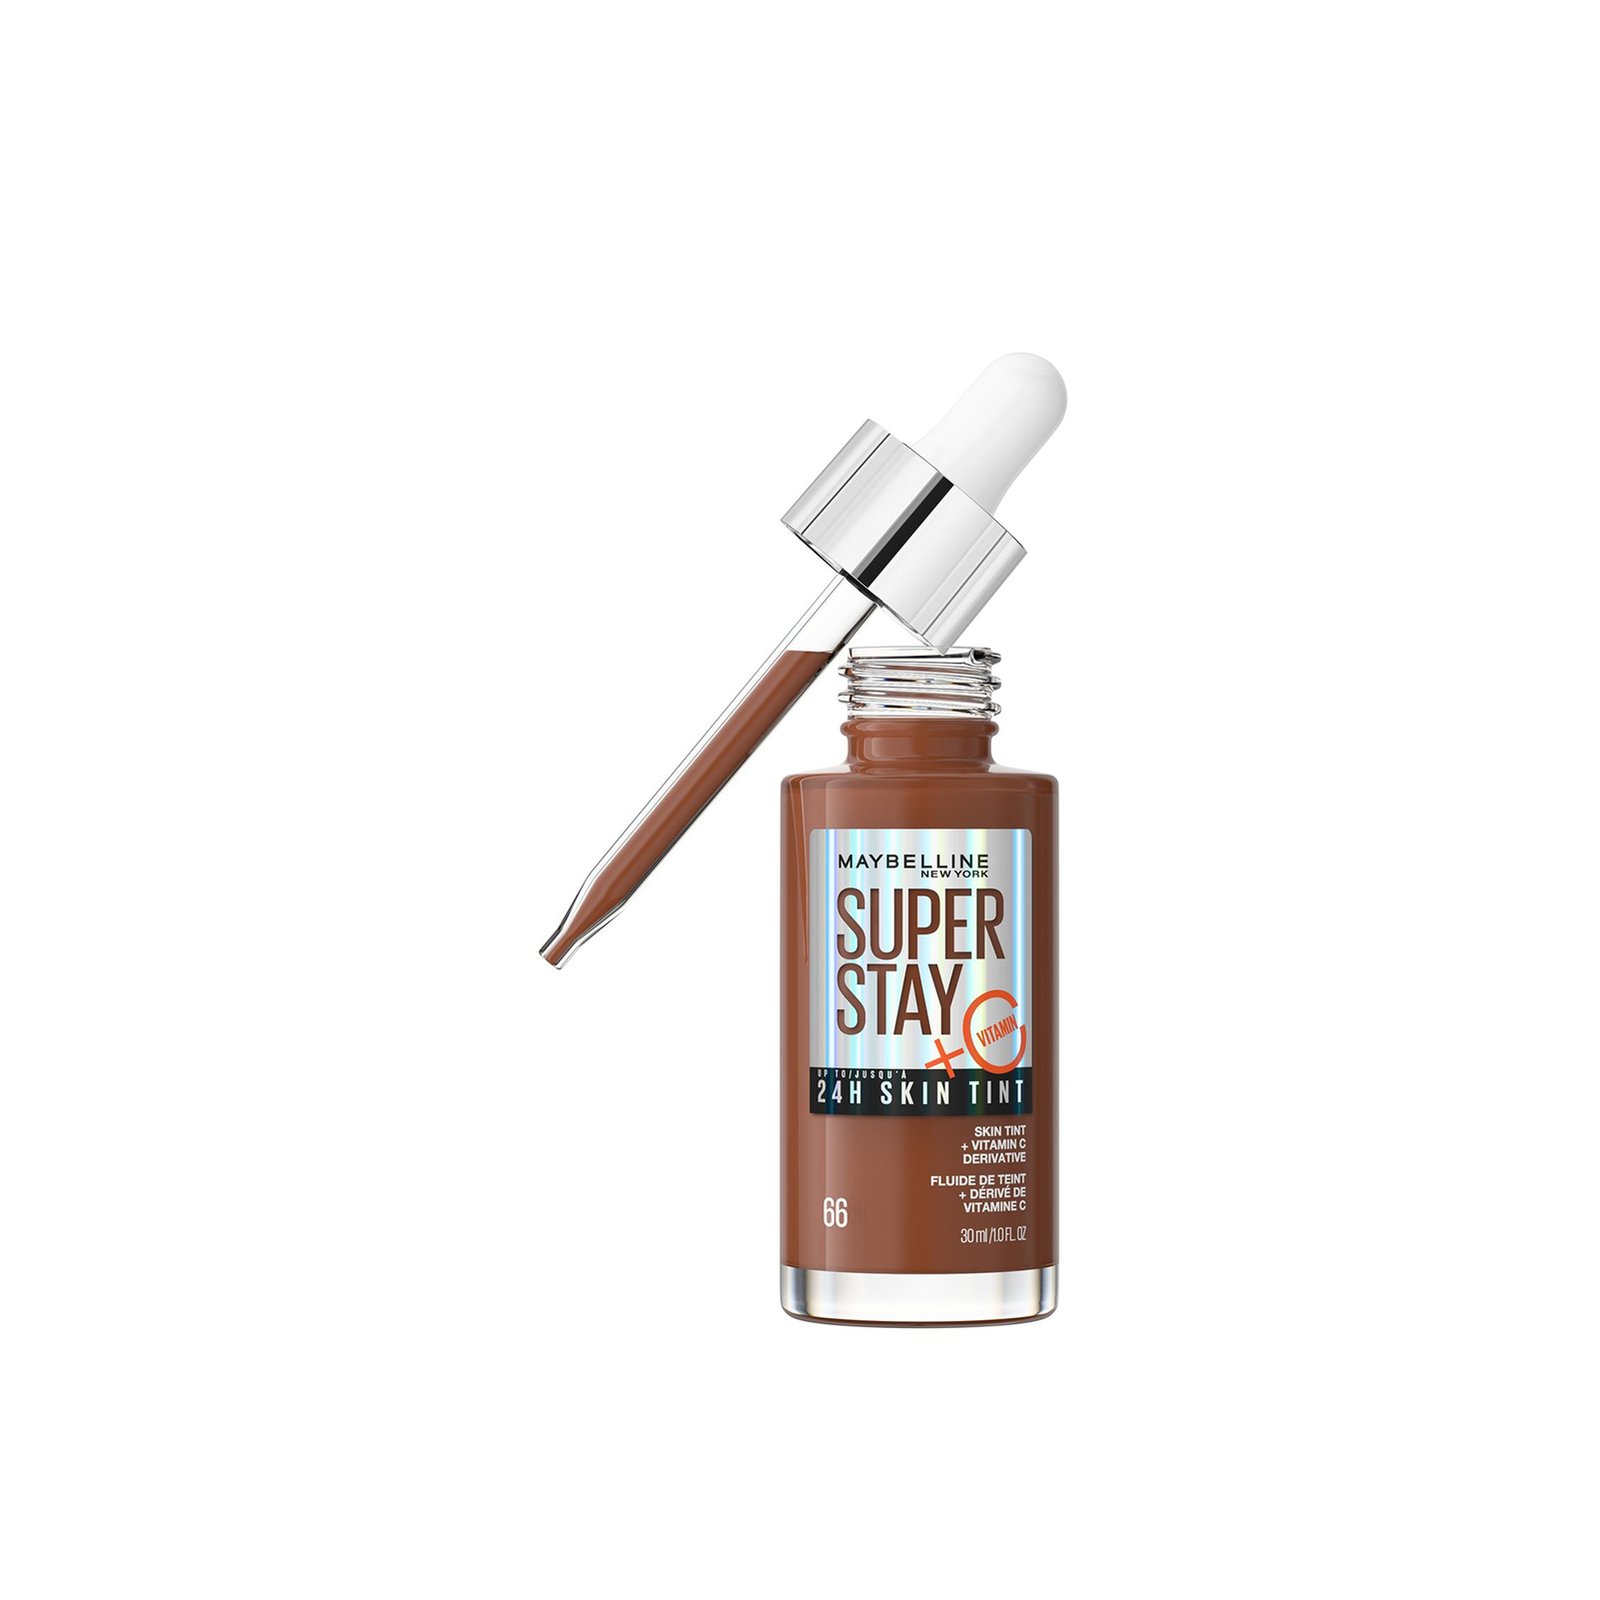 Maybelline Super Stay 24H Skin Tint Foundation 66 30ml